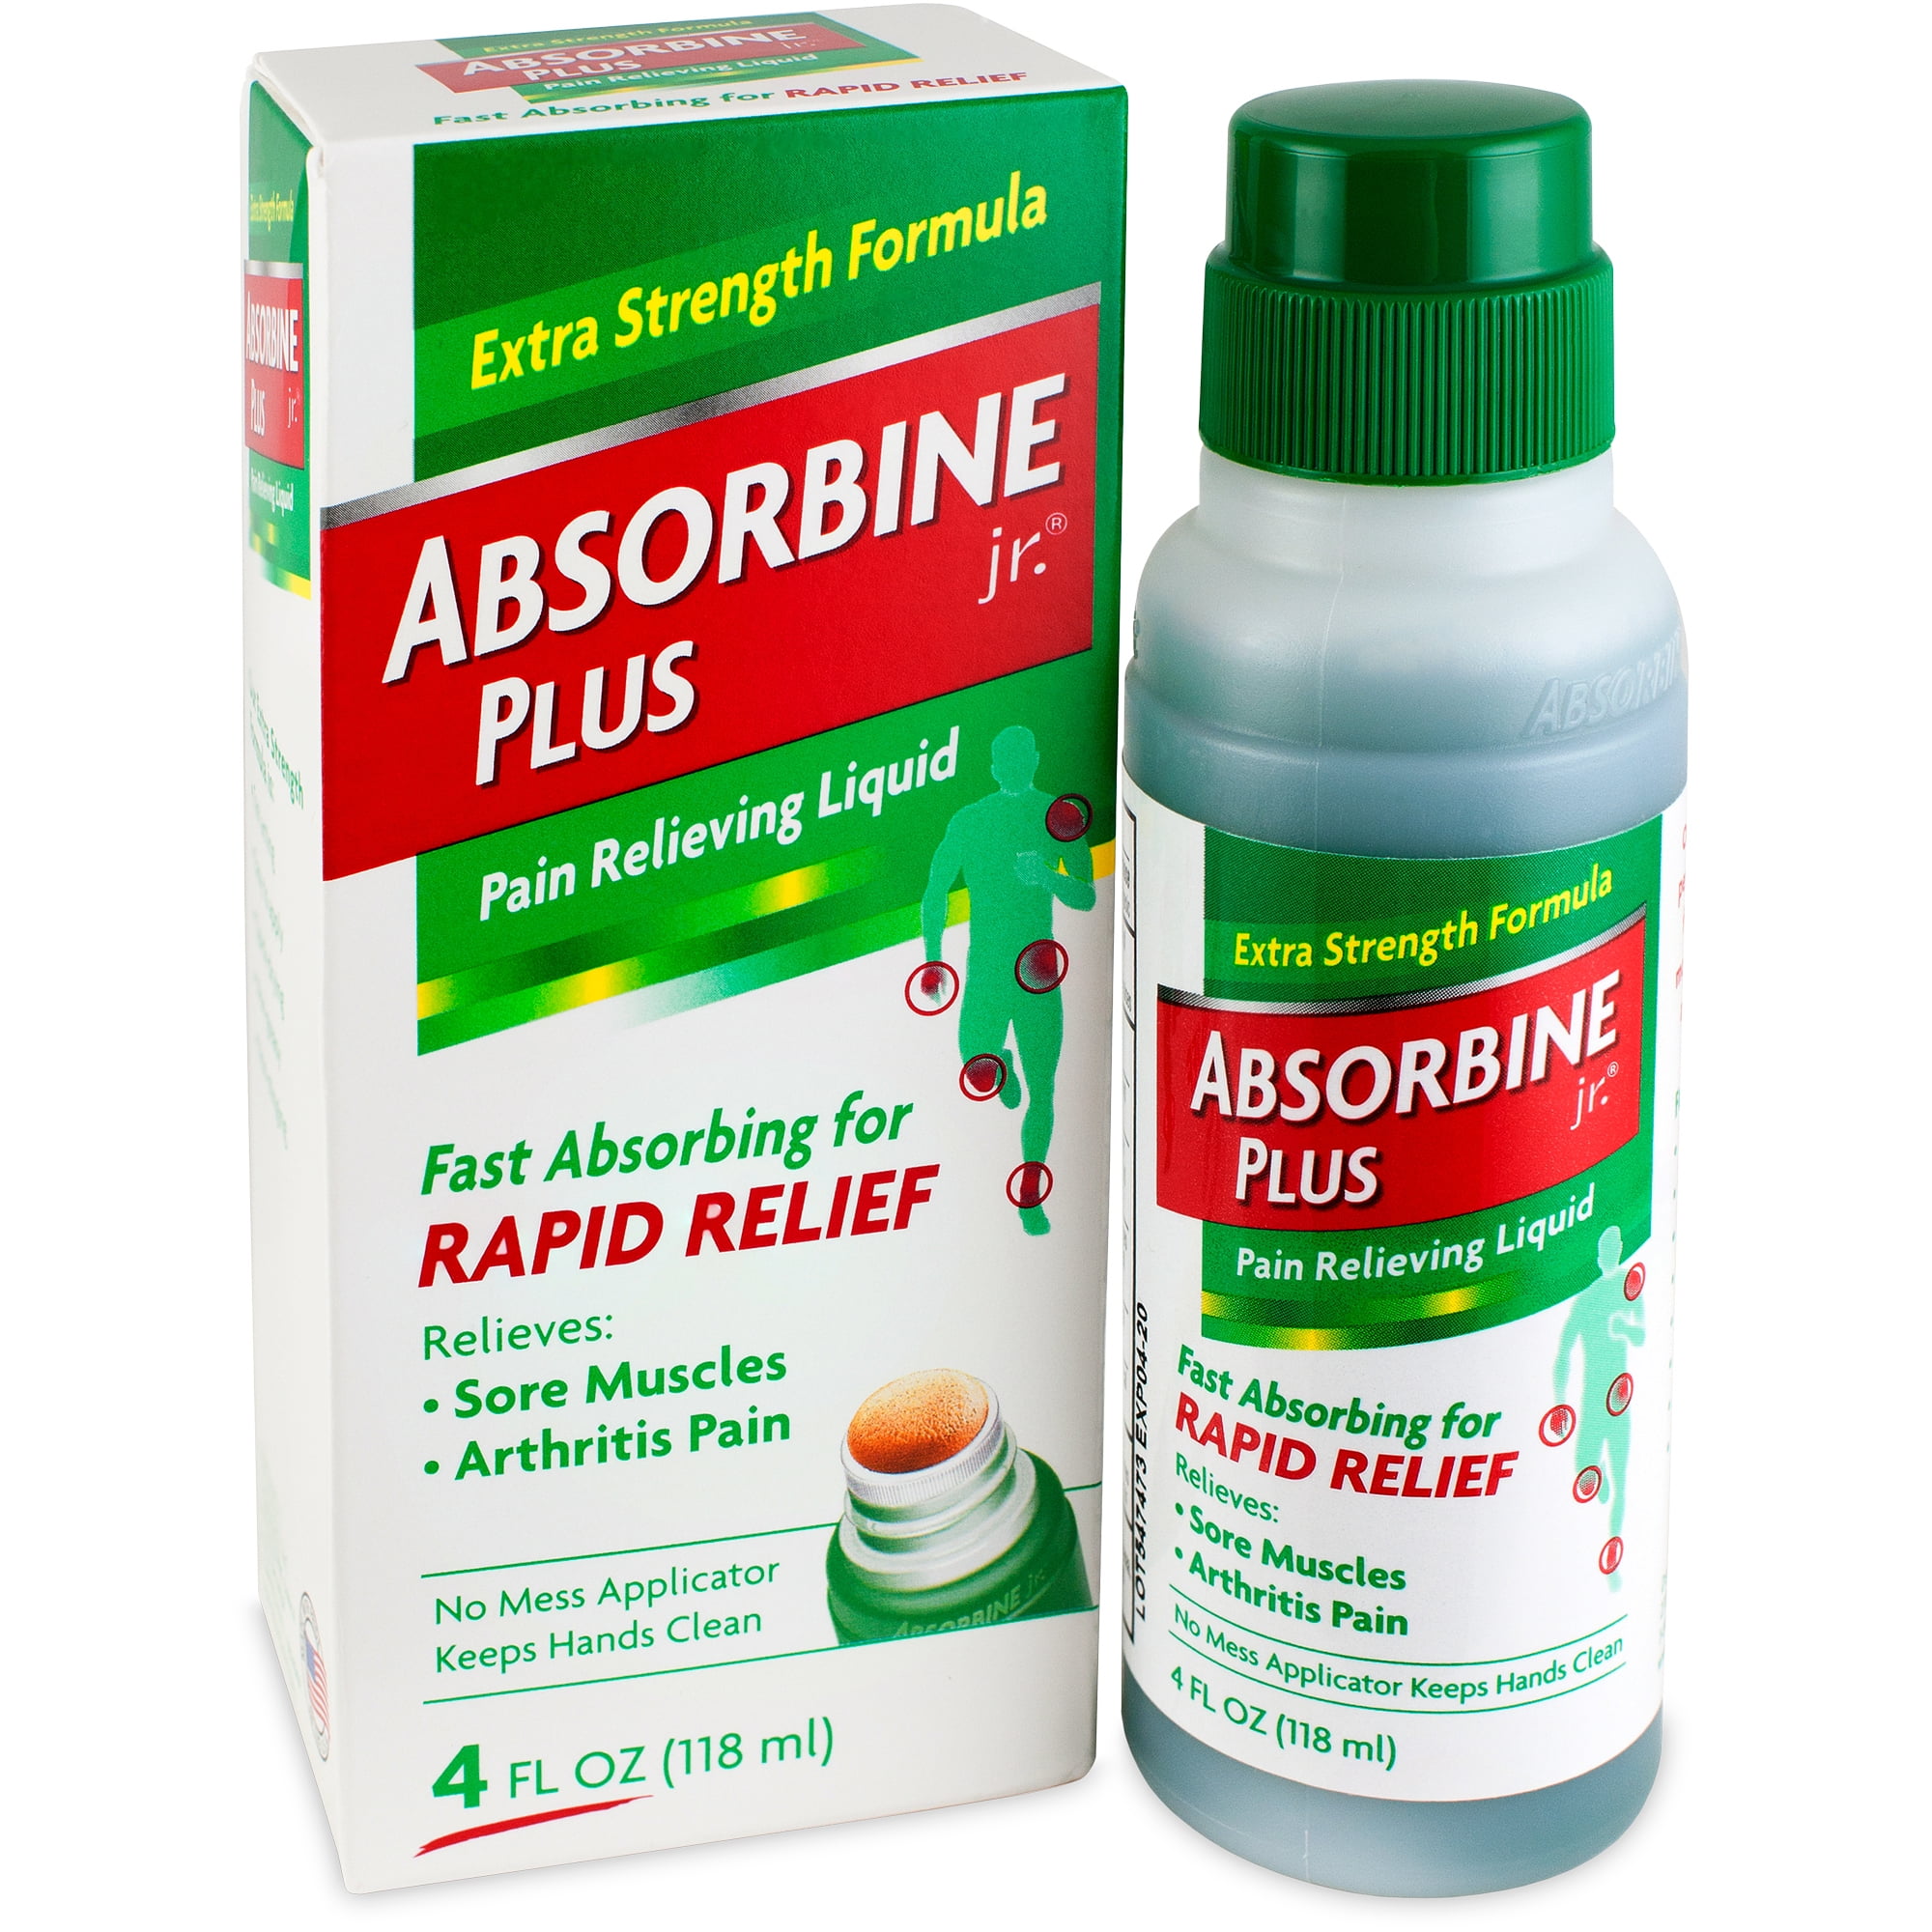 Absorbine Jr. Pain Relieving Liquid with Menthol for Sore Muscles, Joint Aches and Arthritis Pain Relief, 4oz